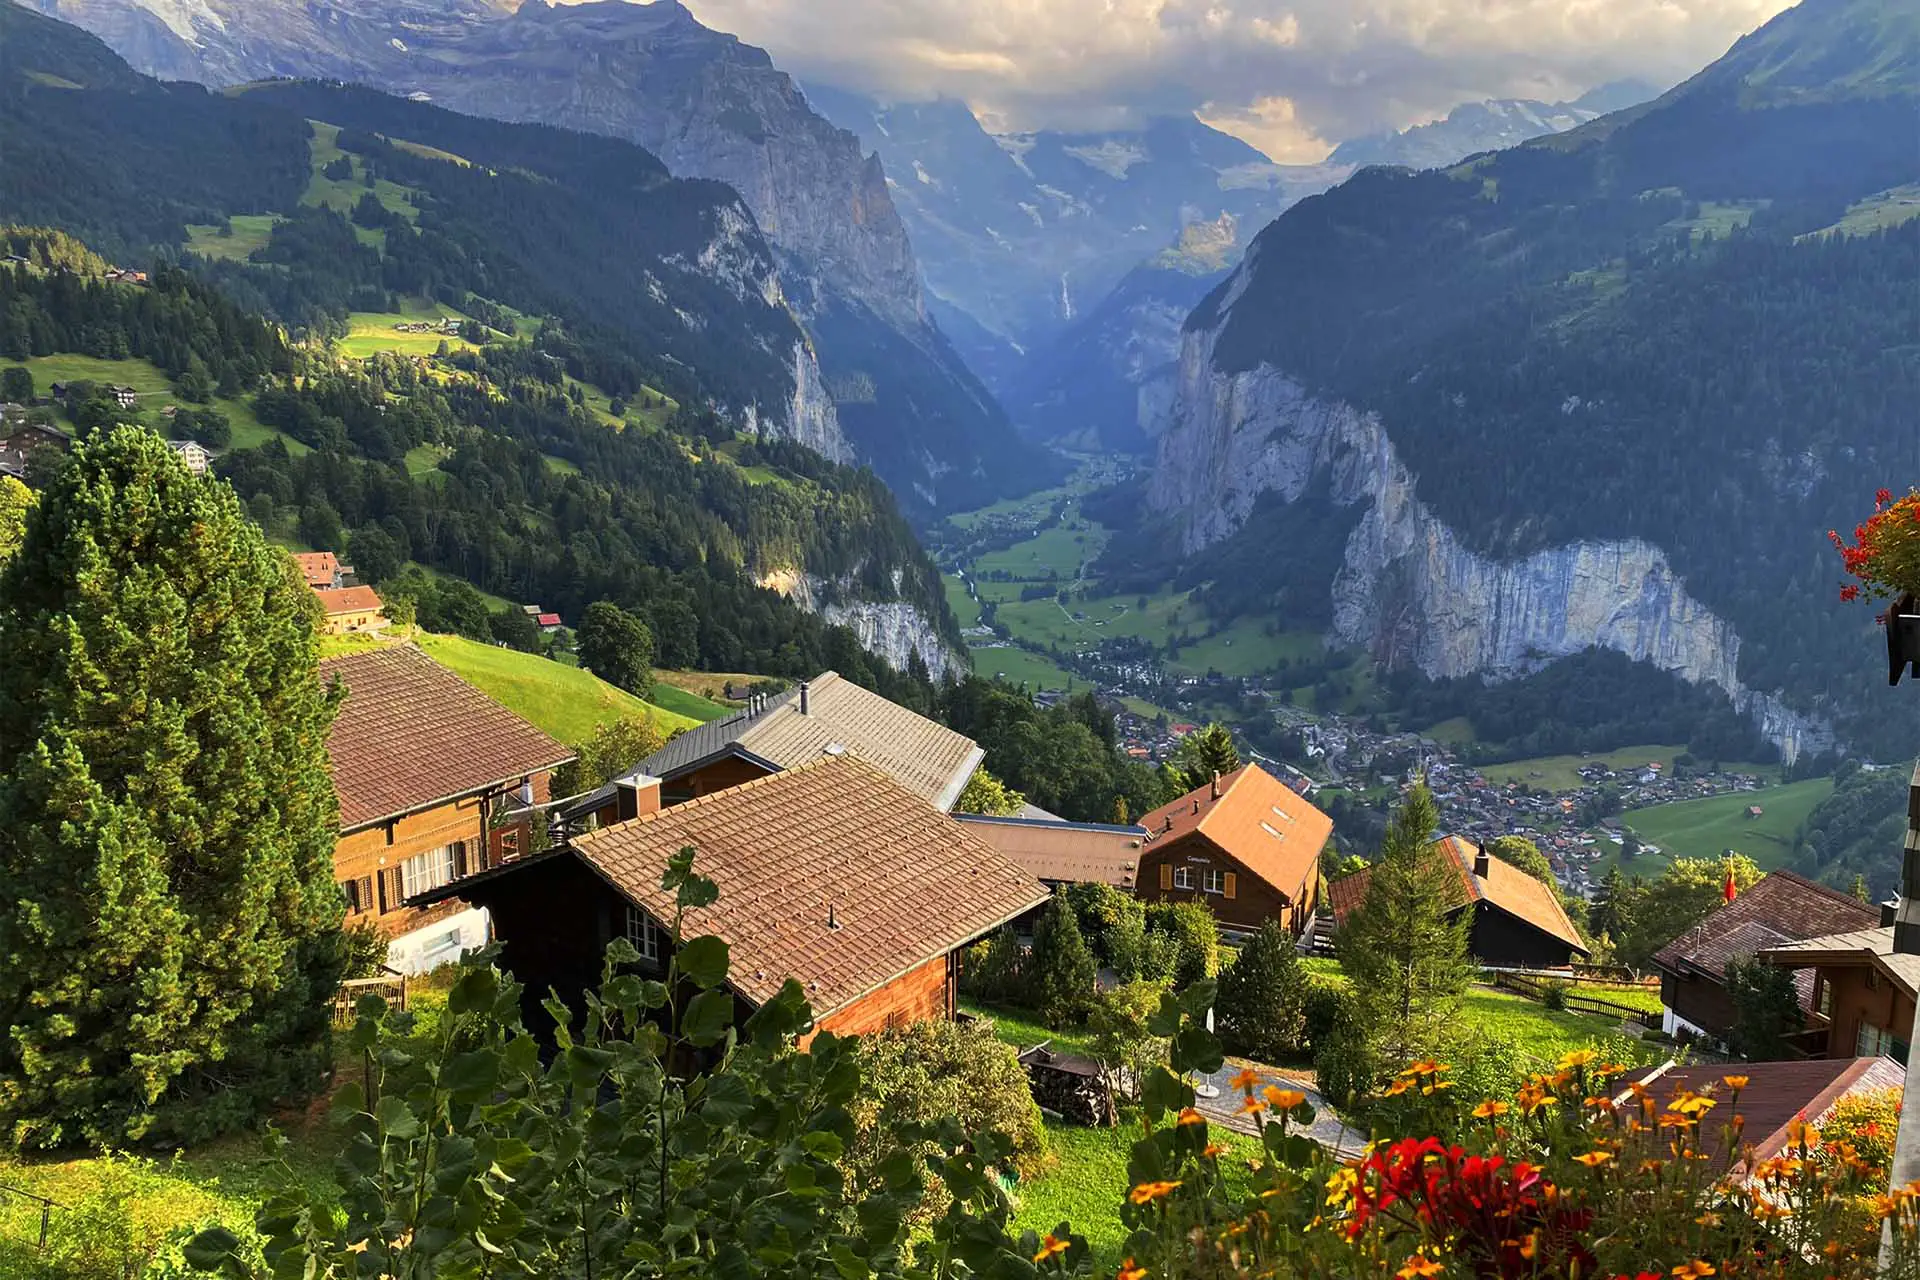 Views from Wengen to the Lauterbrunnen Valley.